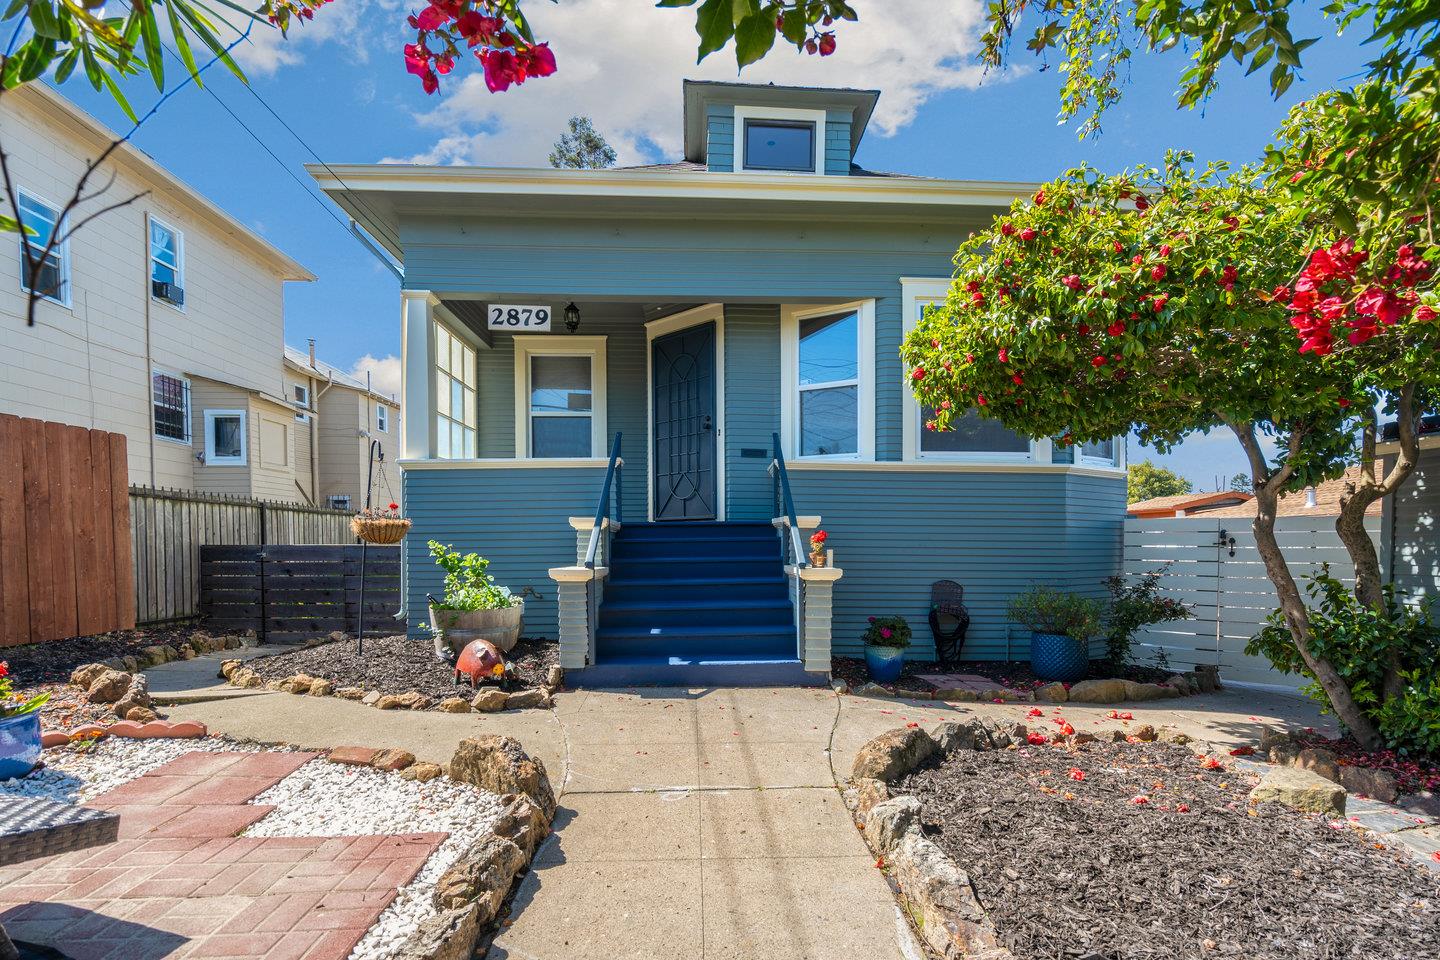 Photo of 2879 Brookdale Ave in Oakland, CA